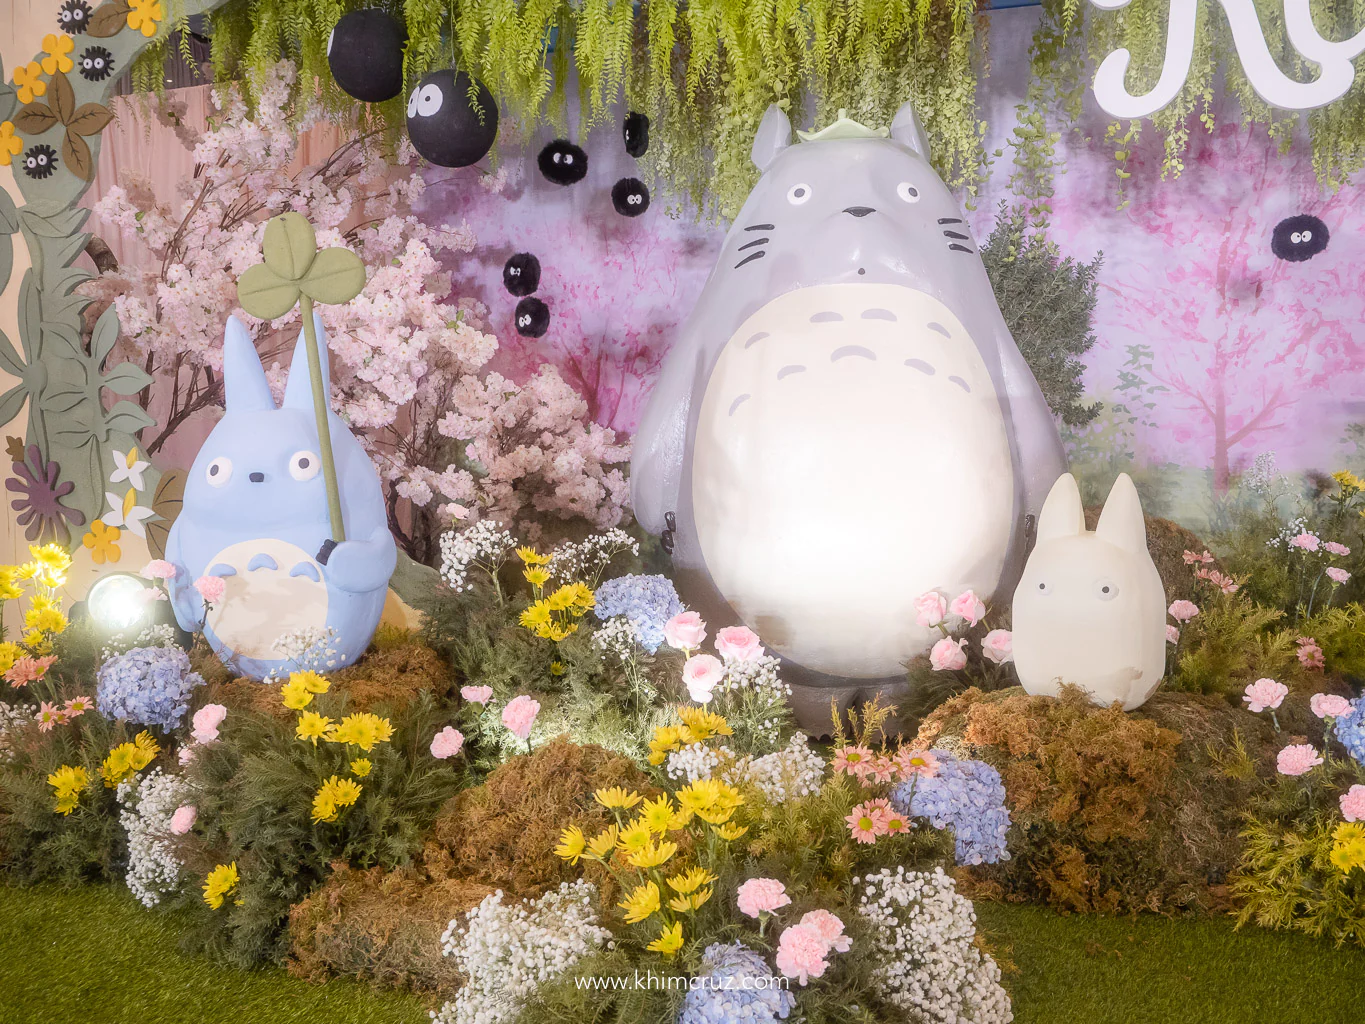 Totoro 3D character pastel color palette on a forest setting stage diorama